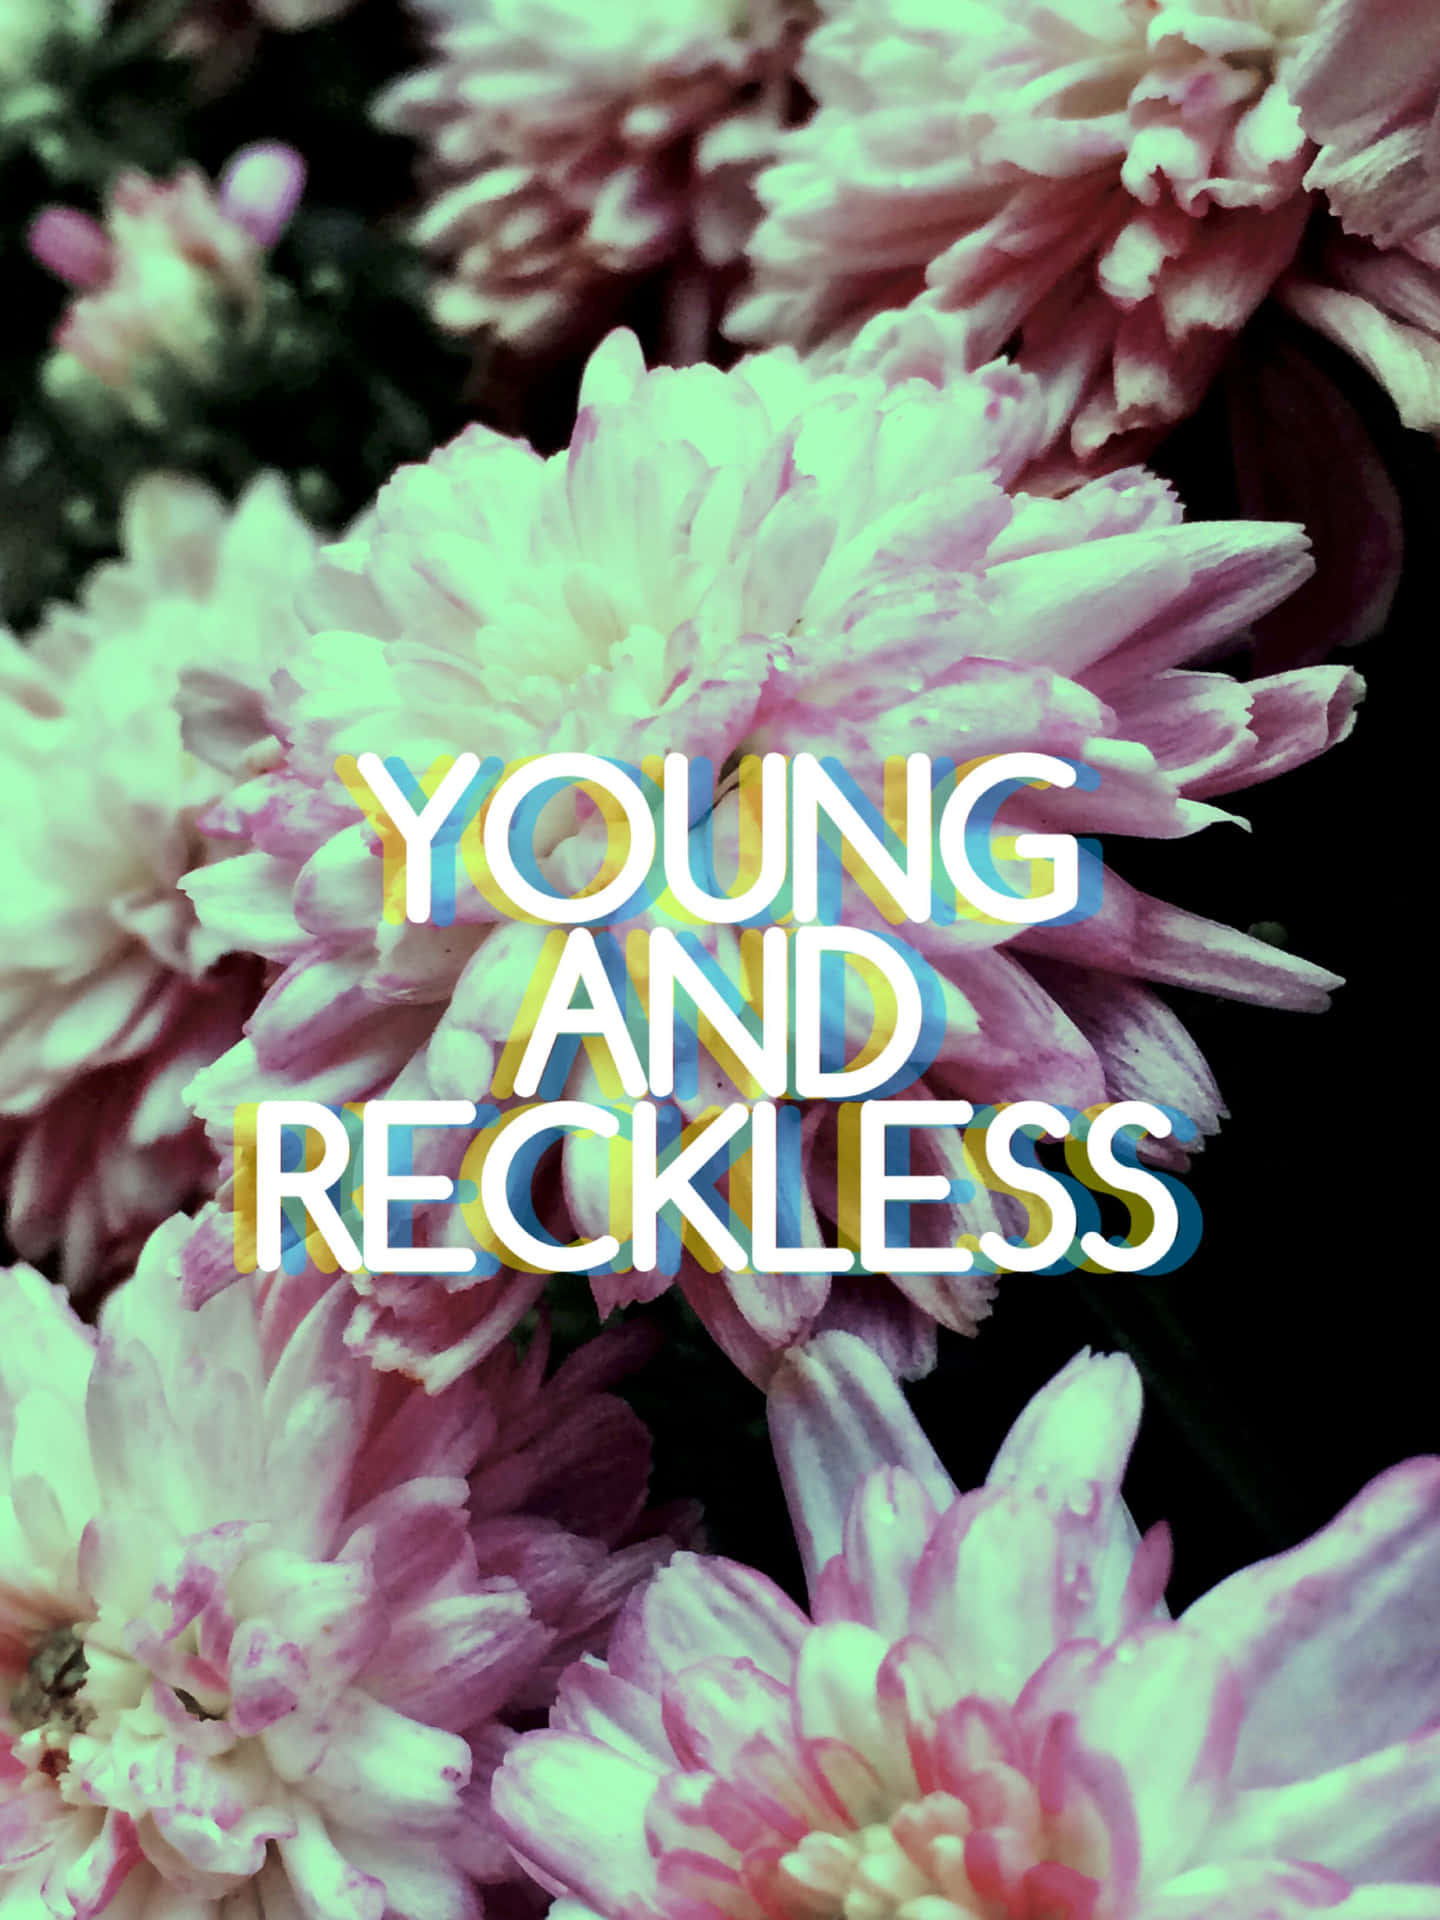 reckless quotes tumblr